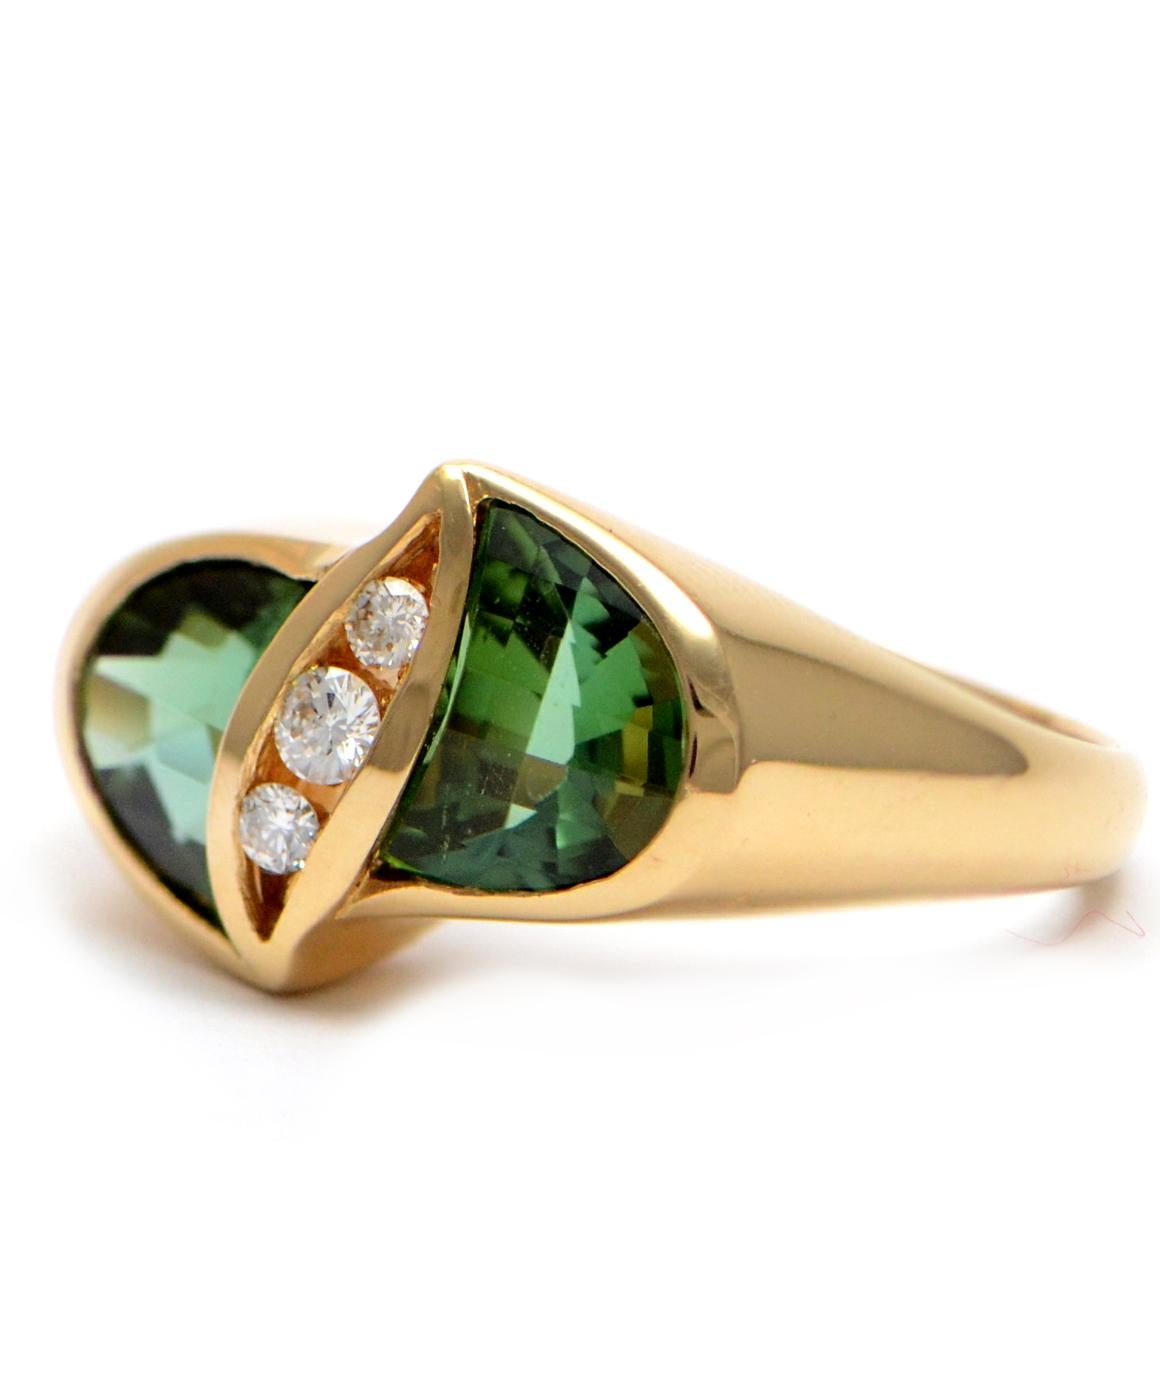 Solid 14K Yellow Gold Genuine Green Tourmaline & Natural Diamond Ring 5.9g
Excellent condition. This solid 14K yellow gold ring features 2 half moon shape green tourmaline stones that measure approximately 7.79mm X 5.66mm. There are 3 natural round